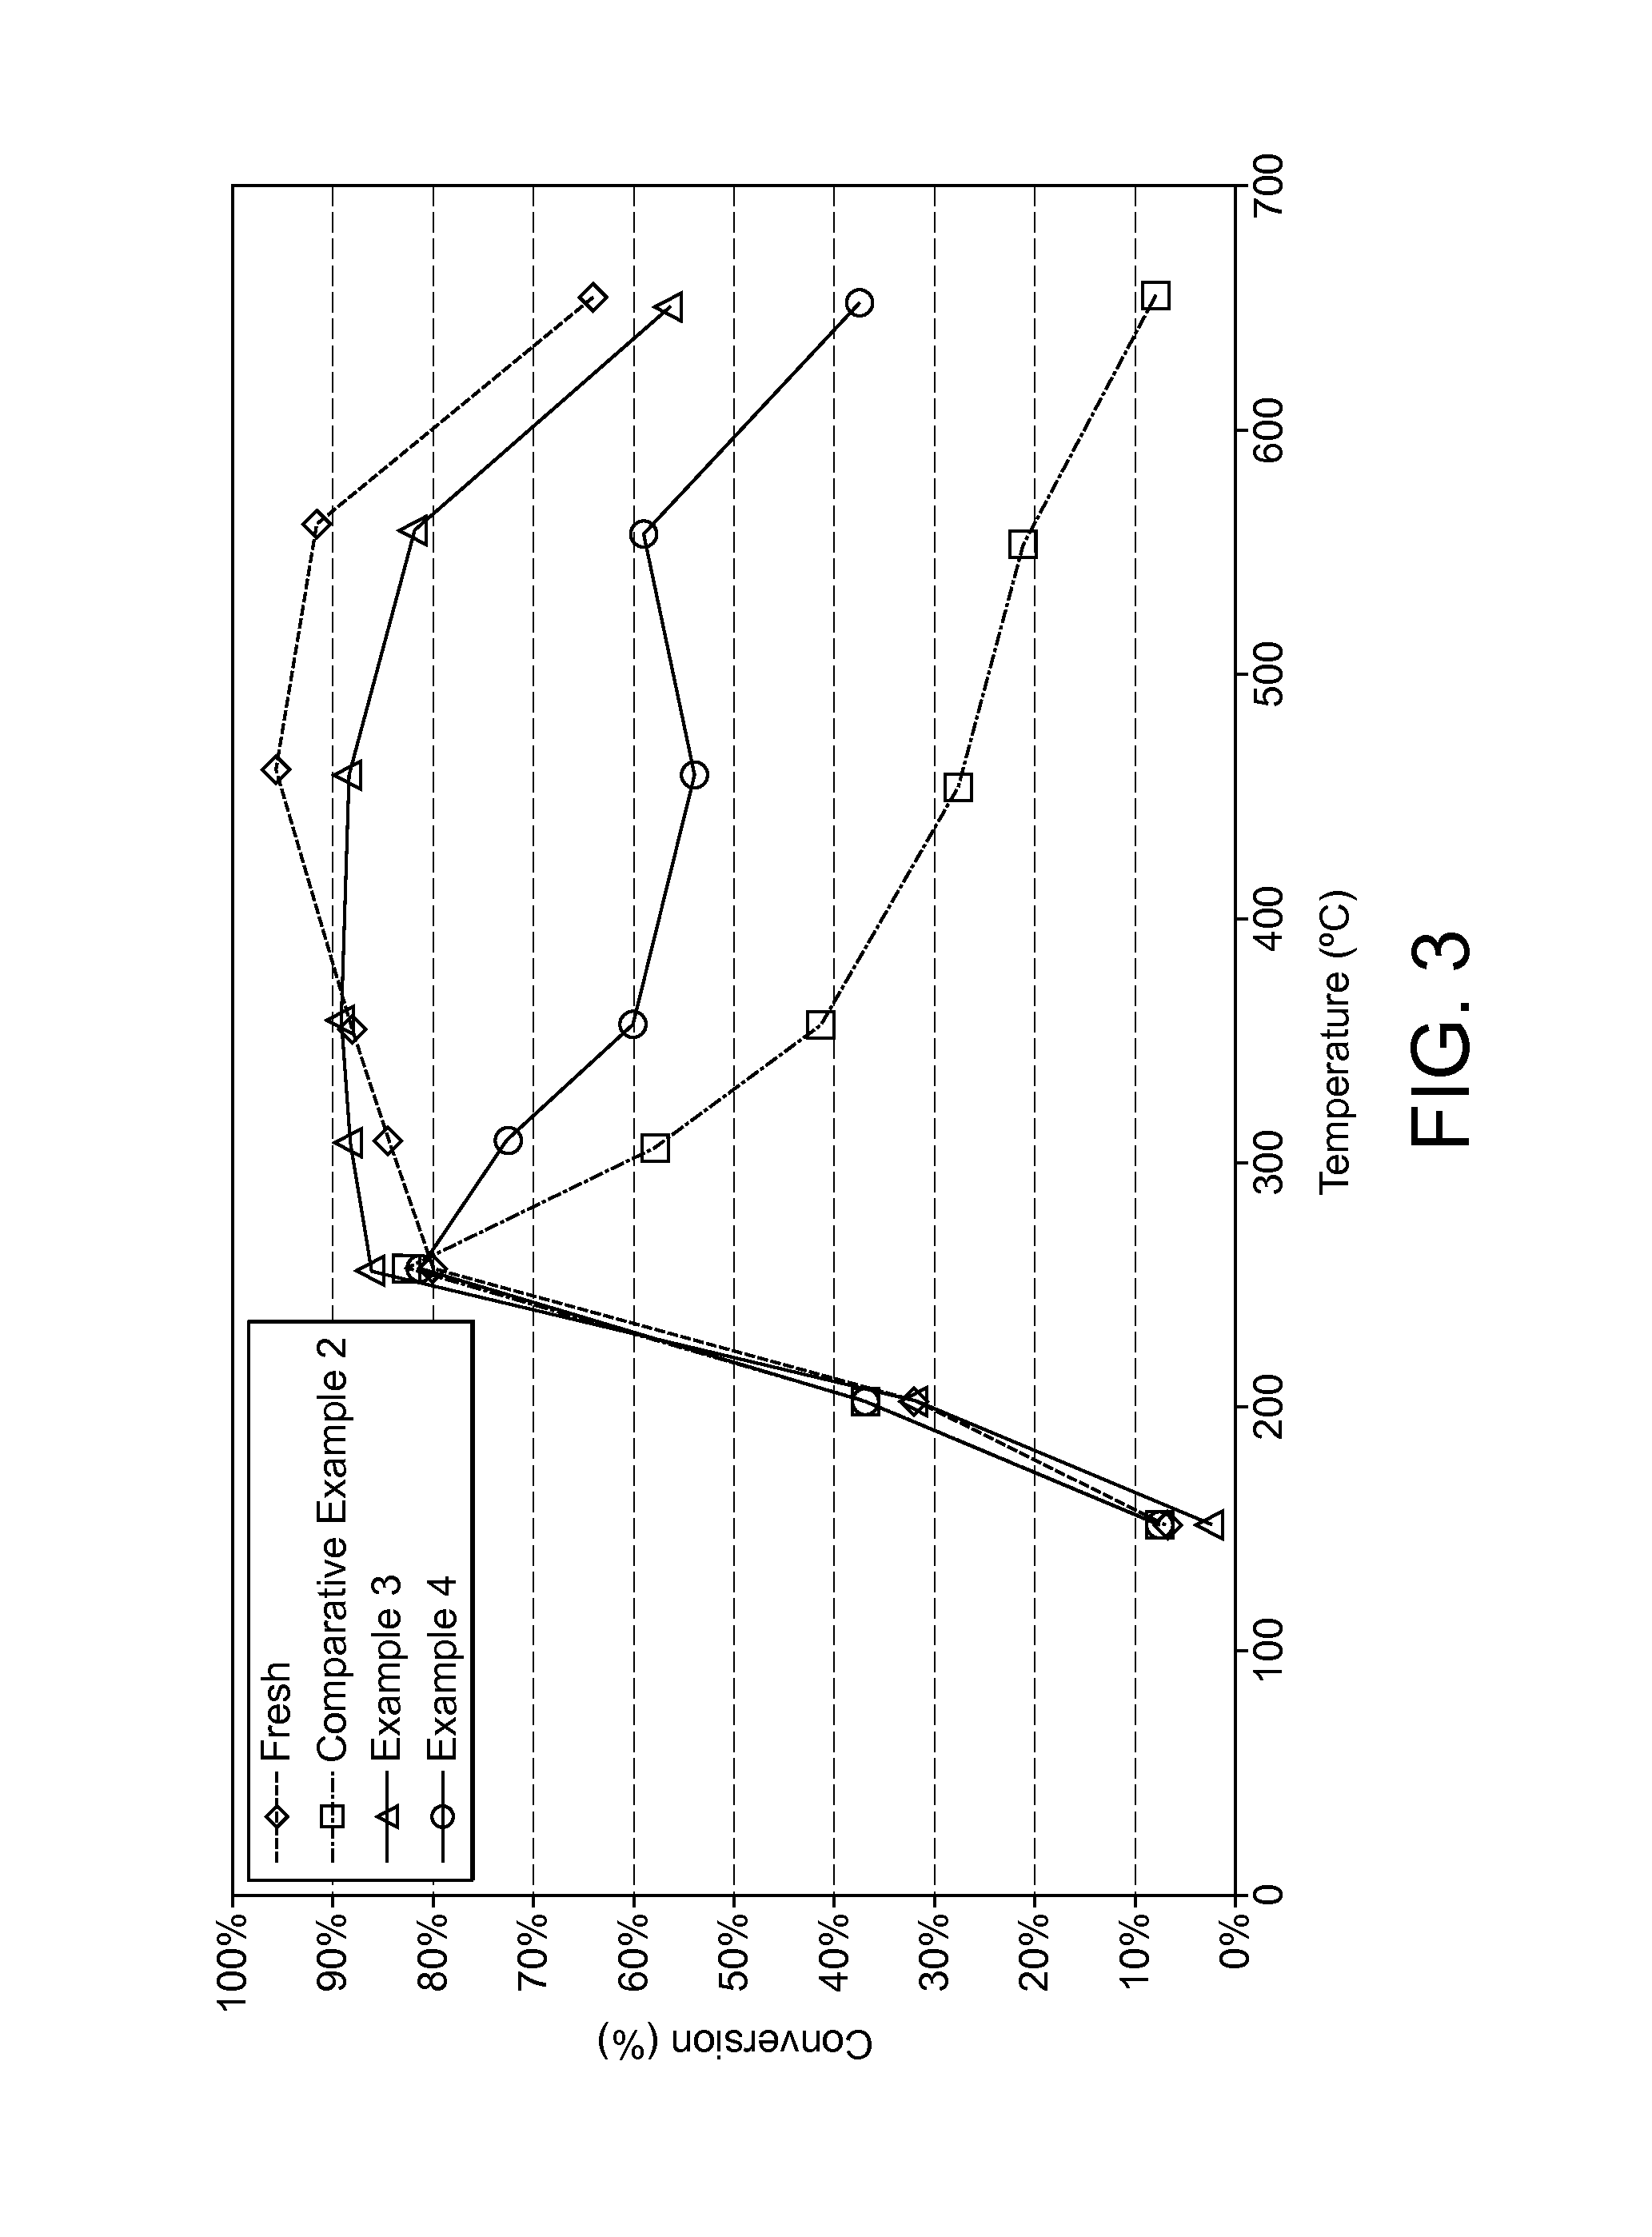 Substrate monolith comprising scr catalyst